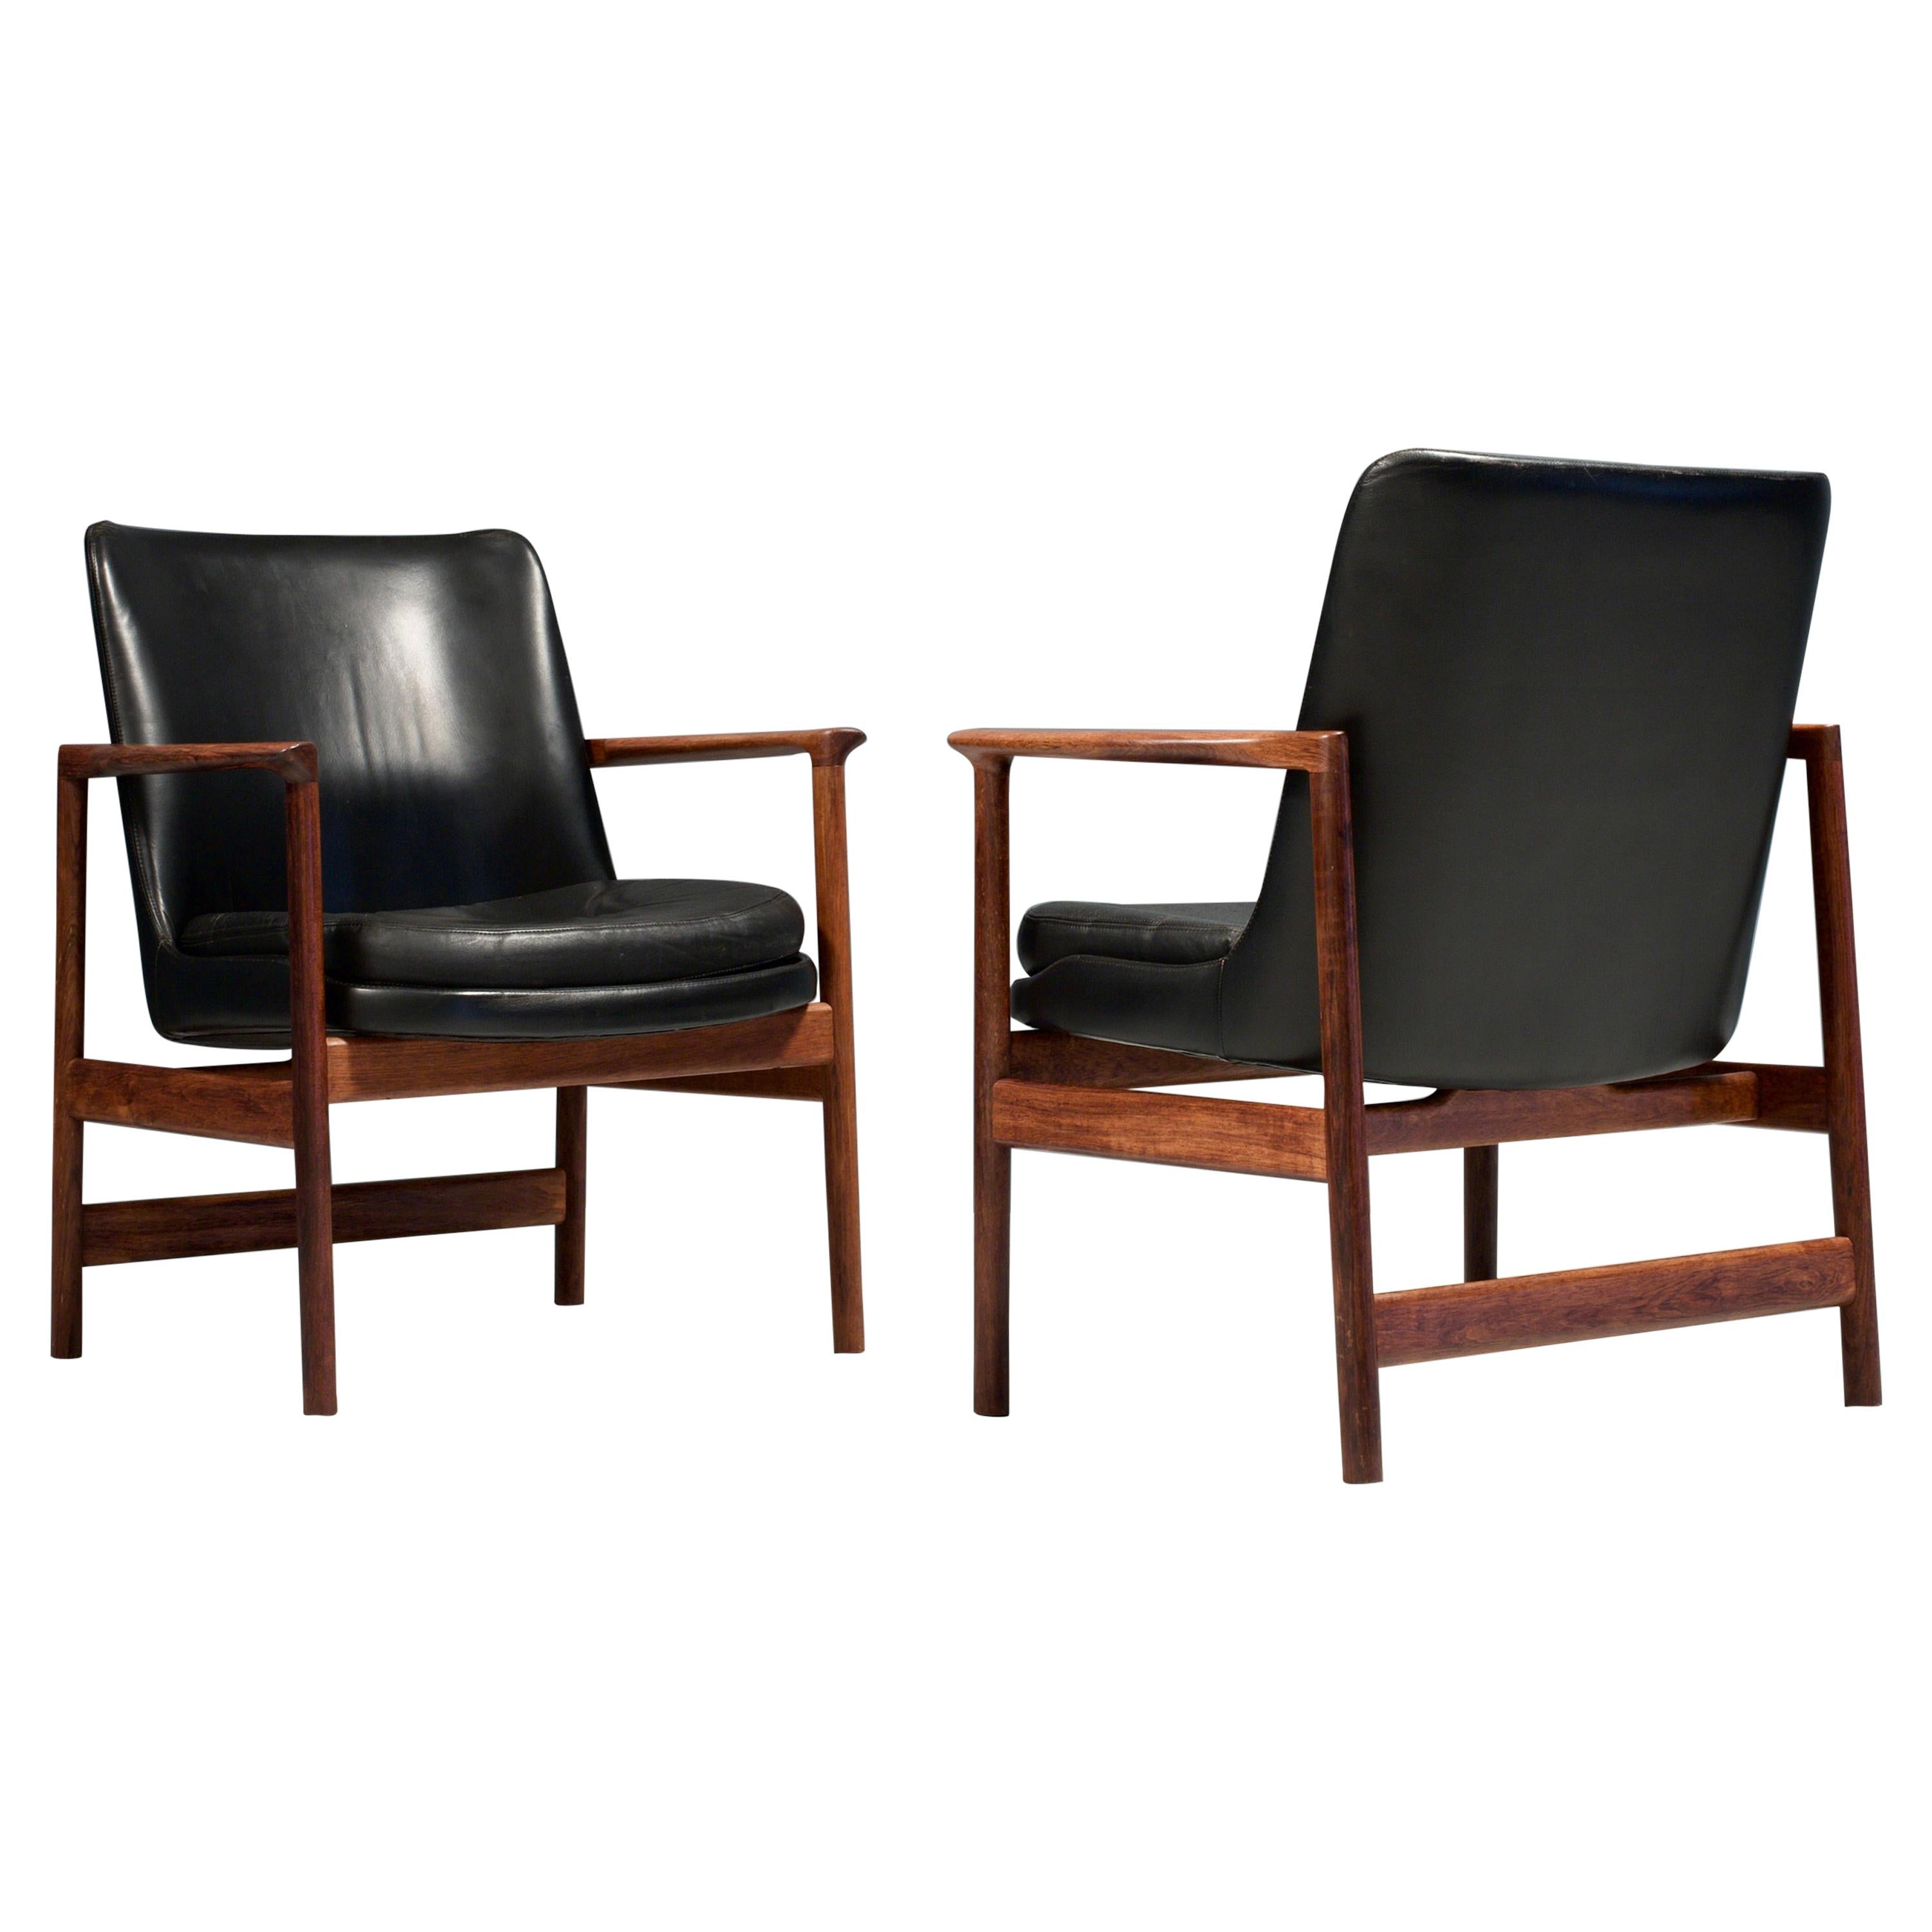 Set of Two Kofod-Larsen Armchairs in Black Leather and Teak, Denmark, 1960s